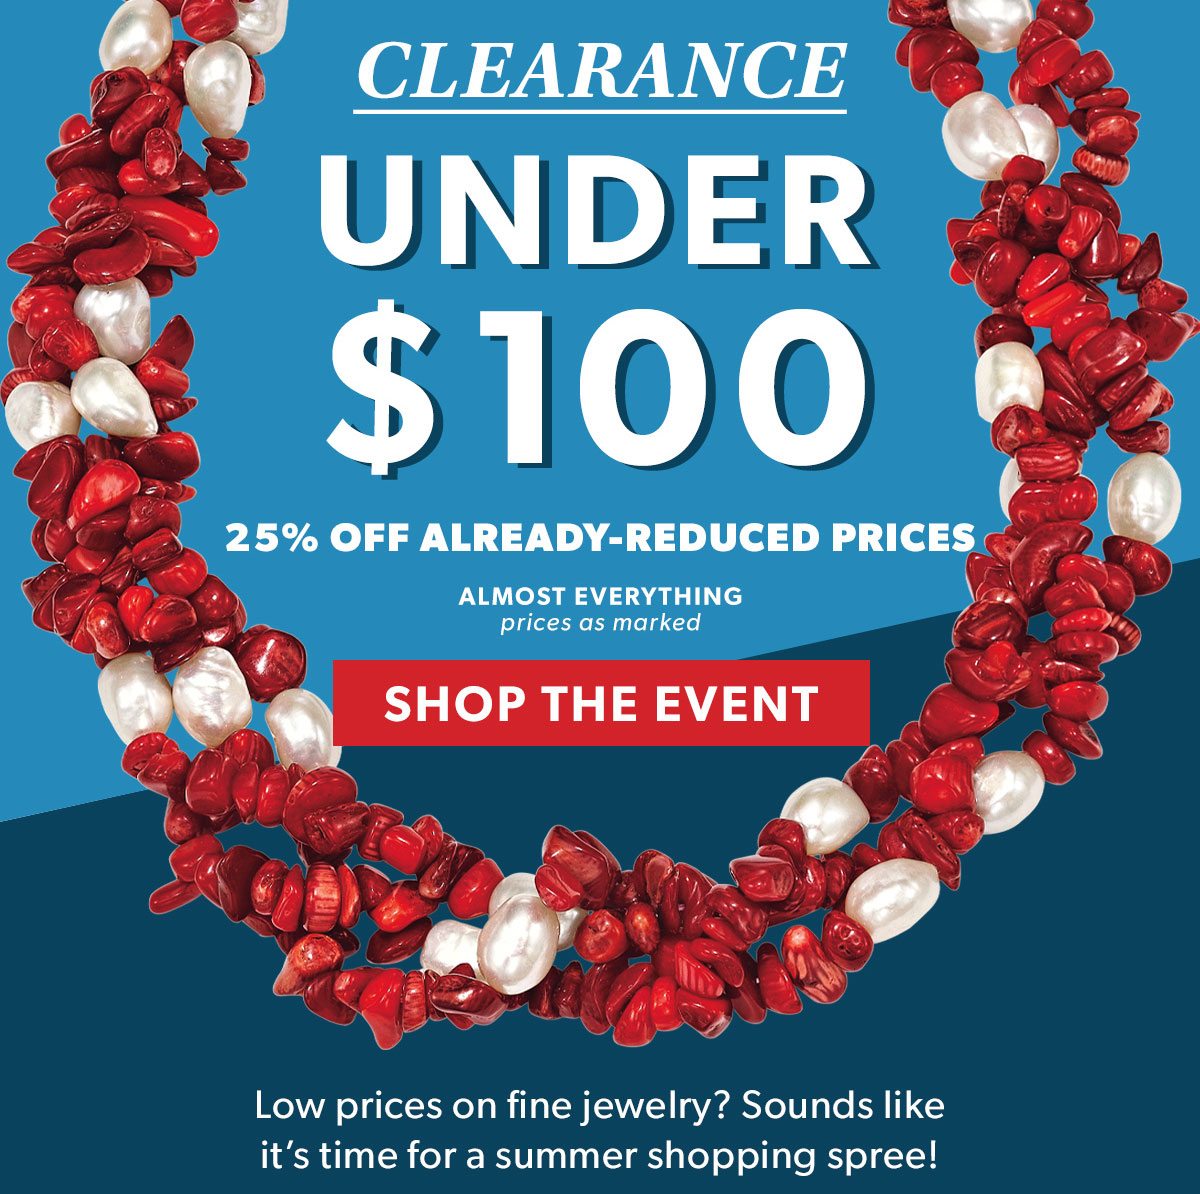 Clearance Under $100. 25% Off Already-Reduced Prices. Almost Everything. Prices as Marked. Shop The Event